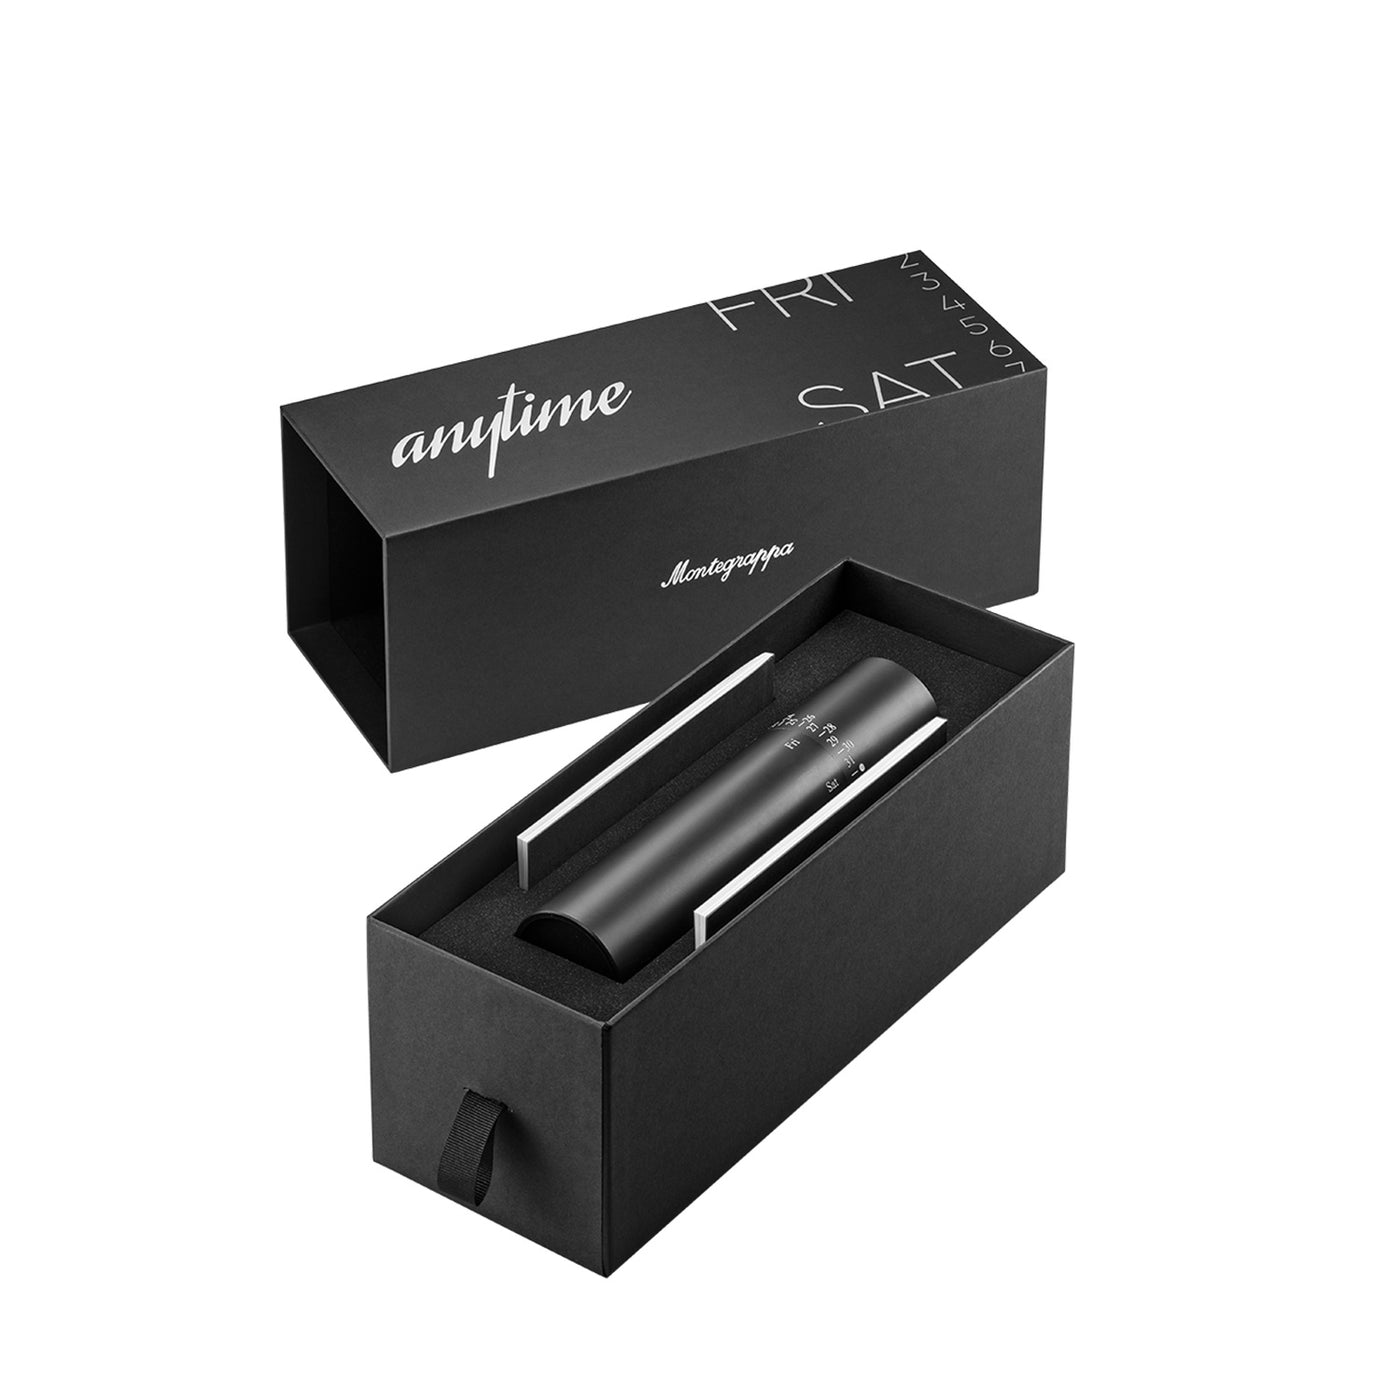 Montegrappa Anytime By Paolo Favaretto Roller Ball Pen - Maestro (Limited Edition) 5